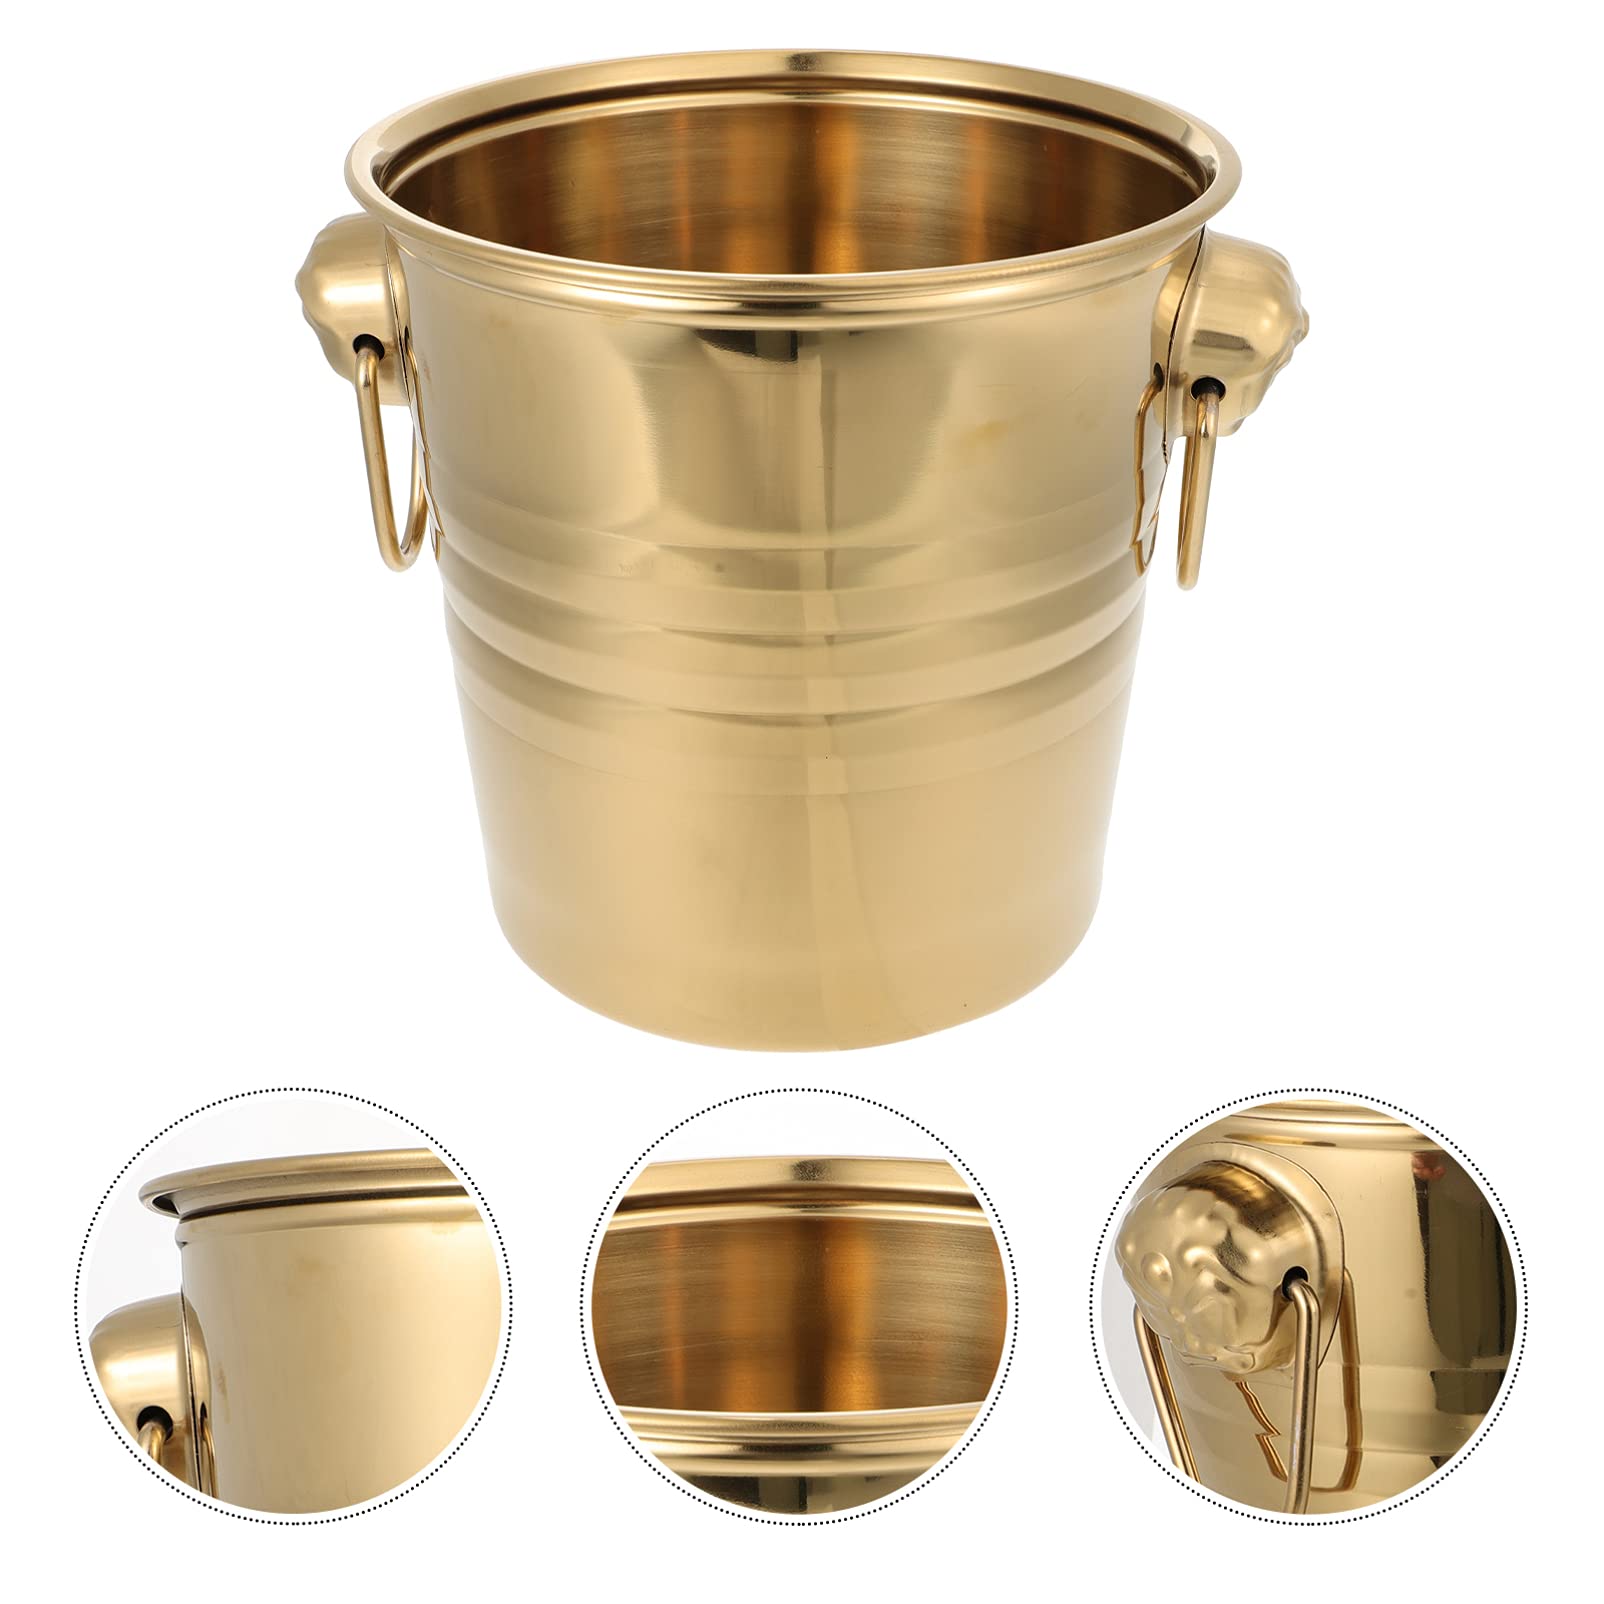 Metal Ice Bucket, Stainless-Steel Beverage Tub with Handles, Hammered Stainless Steel Champagne Service Bucket, Beverage Cooler for Parties Wedding